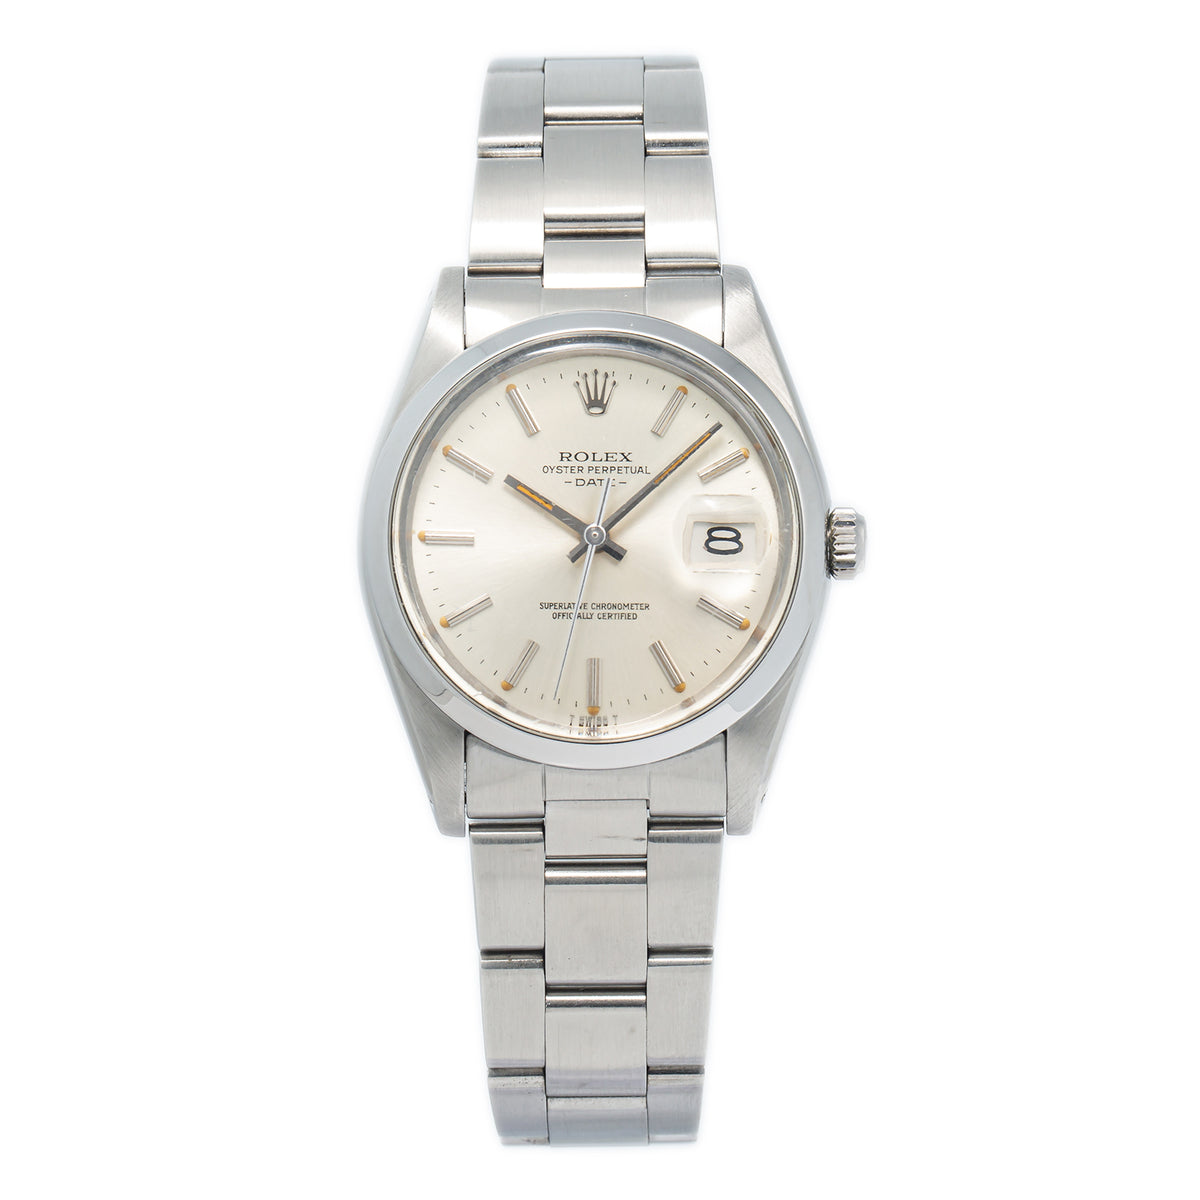 Rolex Oyster Perpetual Date 15000 With Paper Index Silver Dial Men's Watch 34mm